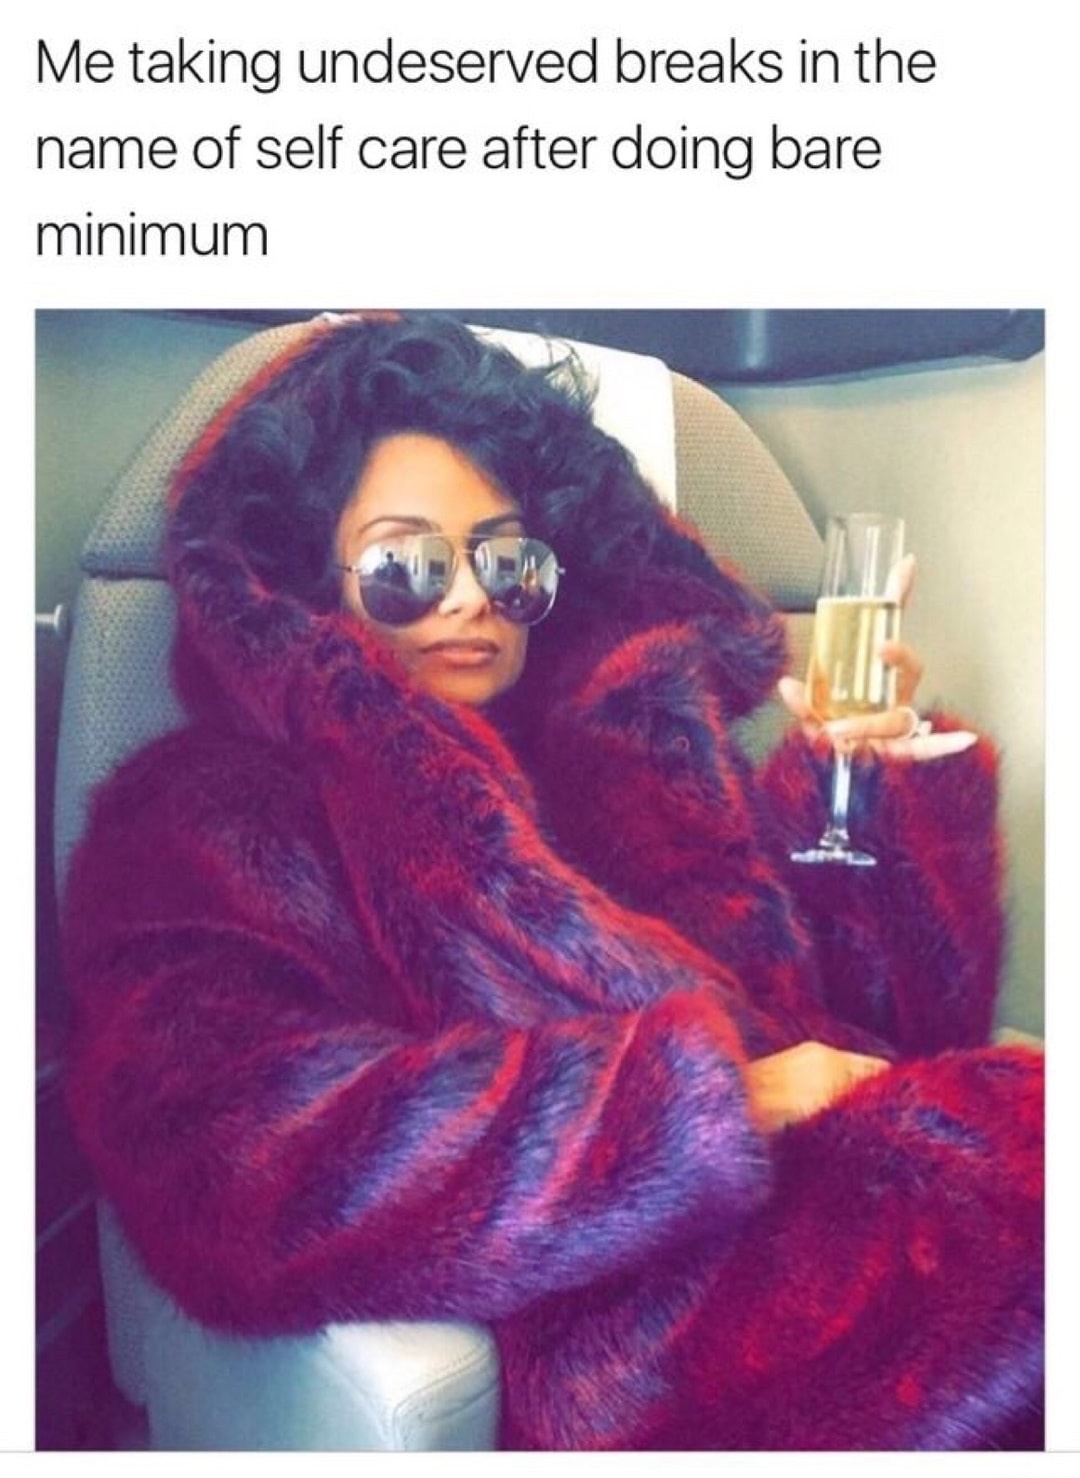 boujee meme - Me taking undeserved breaks in the name of self care after doing bare minimum